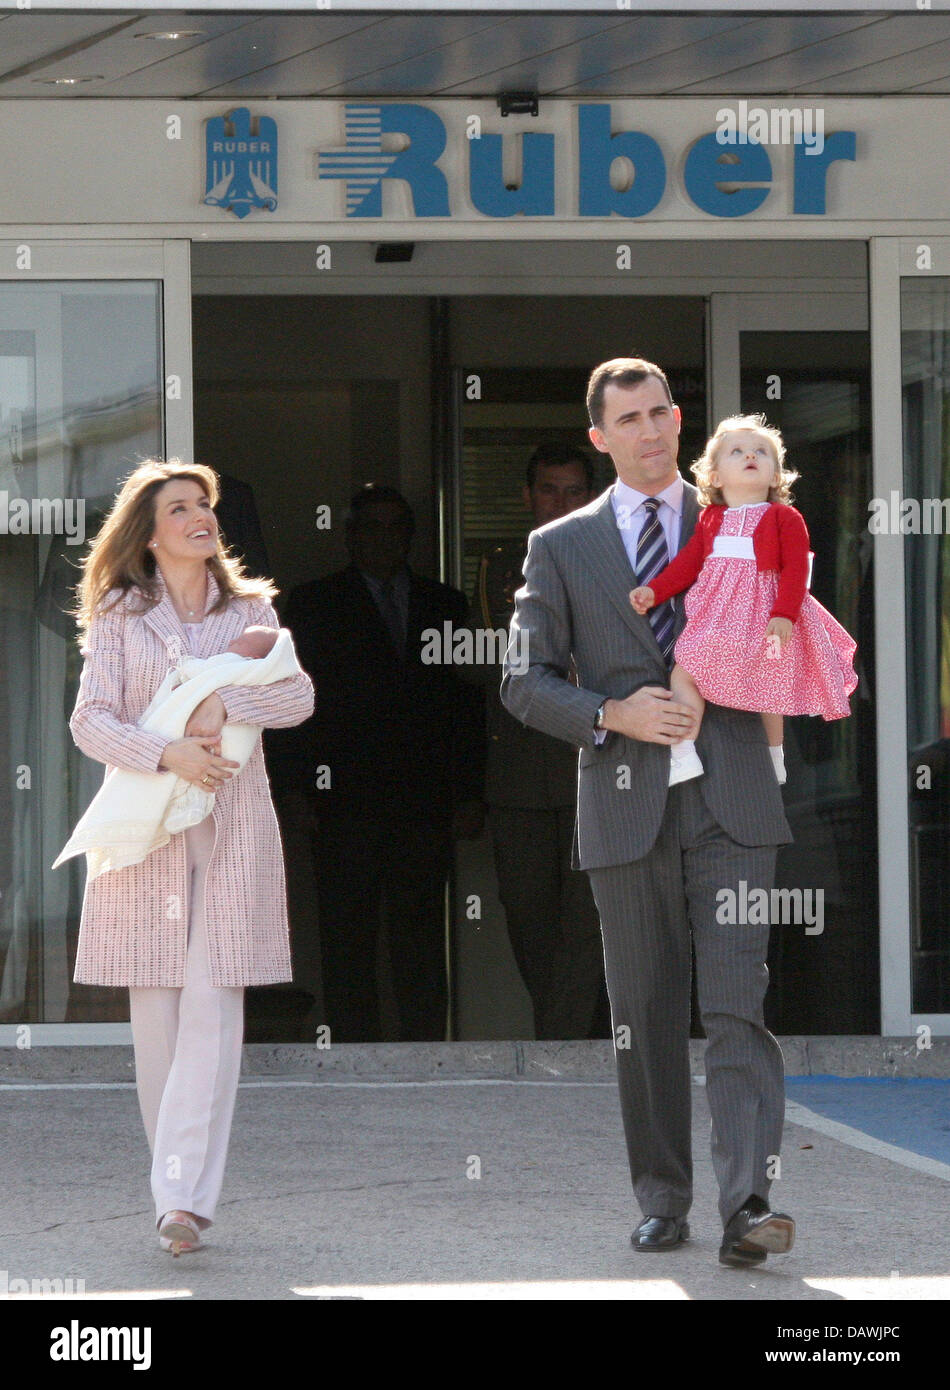 Princess Letizia of Spain (L)  leaves the private 'Ruber Internacional' hospital with her new-born daughter Princess Sofia, her husband Crown Prince Felipe of Spain (2-R) and Princess Leonor in Madrid, Spain, 04 May 2007. Spain's Princess Letizia gave birth to the couple's second child on Sunday. Princess Letizia and Prince Felipe married in 2004. Their first child Leonor, also a d Stock Photo